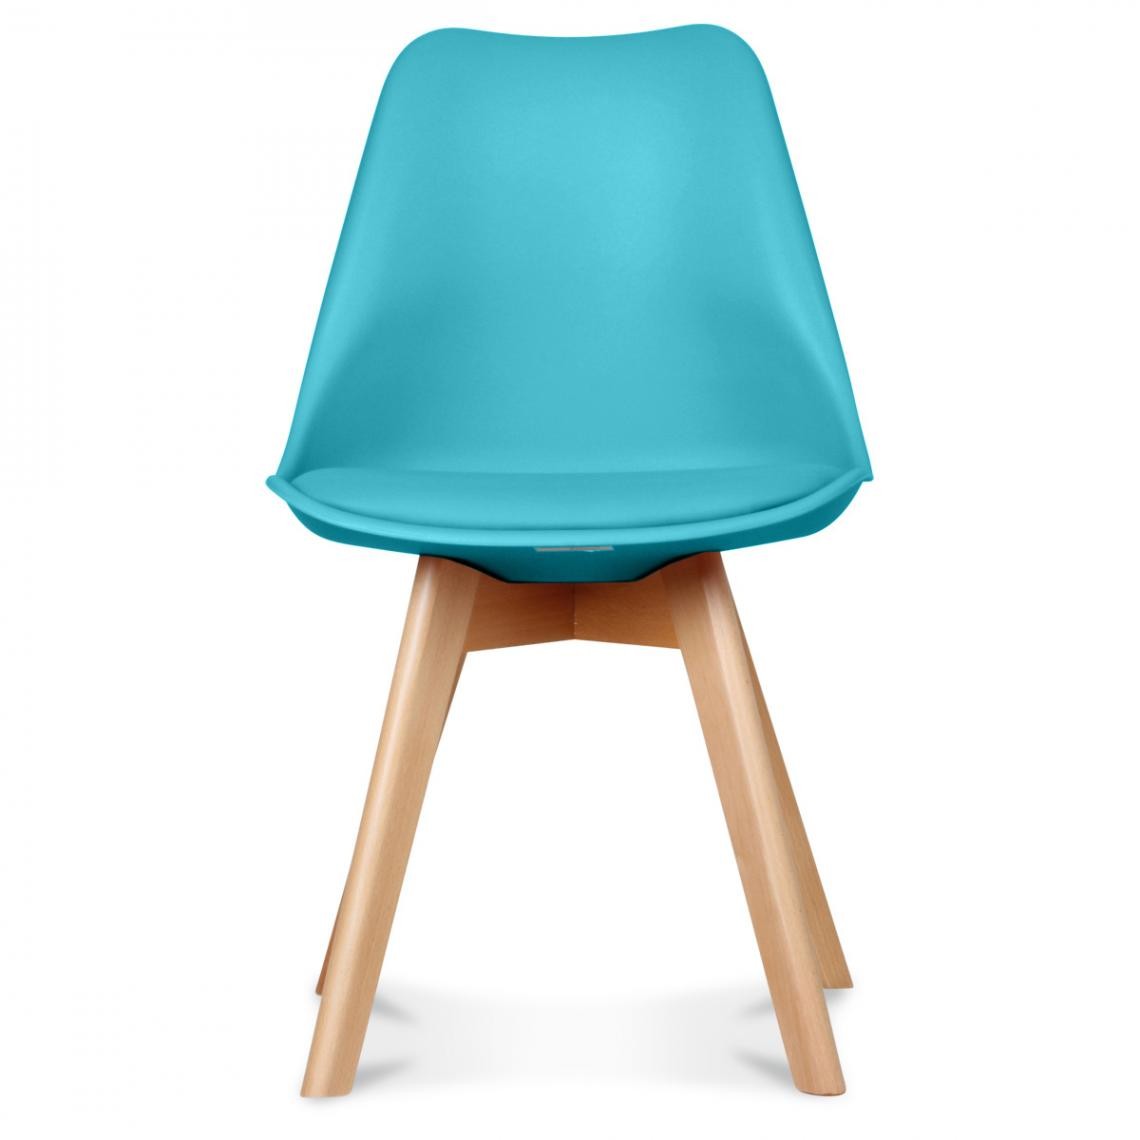 OPJET - Chaise Design Style Scandinave Turquoise ESBEN - Chaises